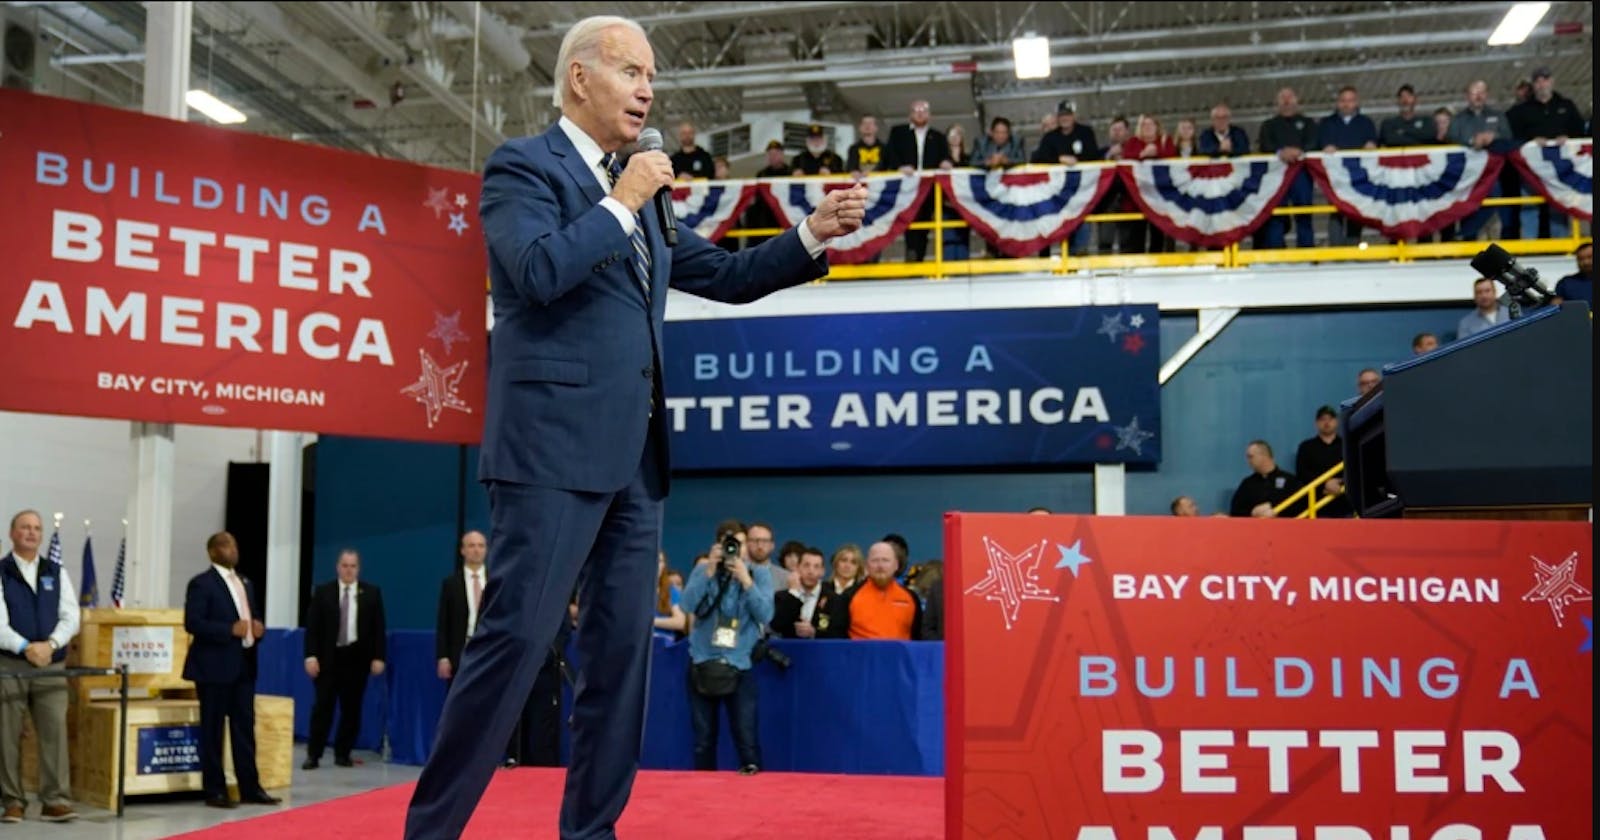 What matters for many voters of both parties is that Joe Biden